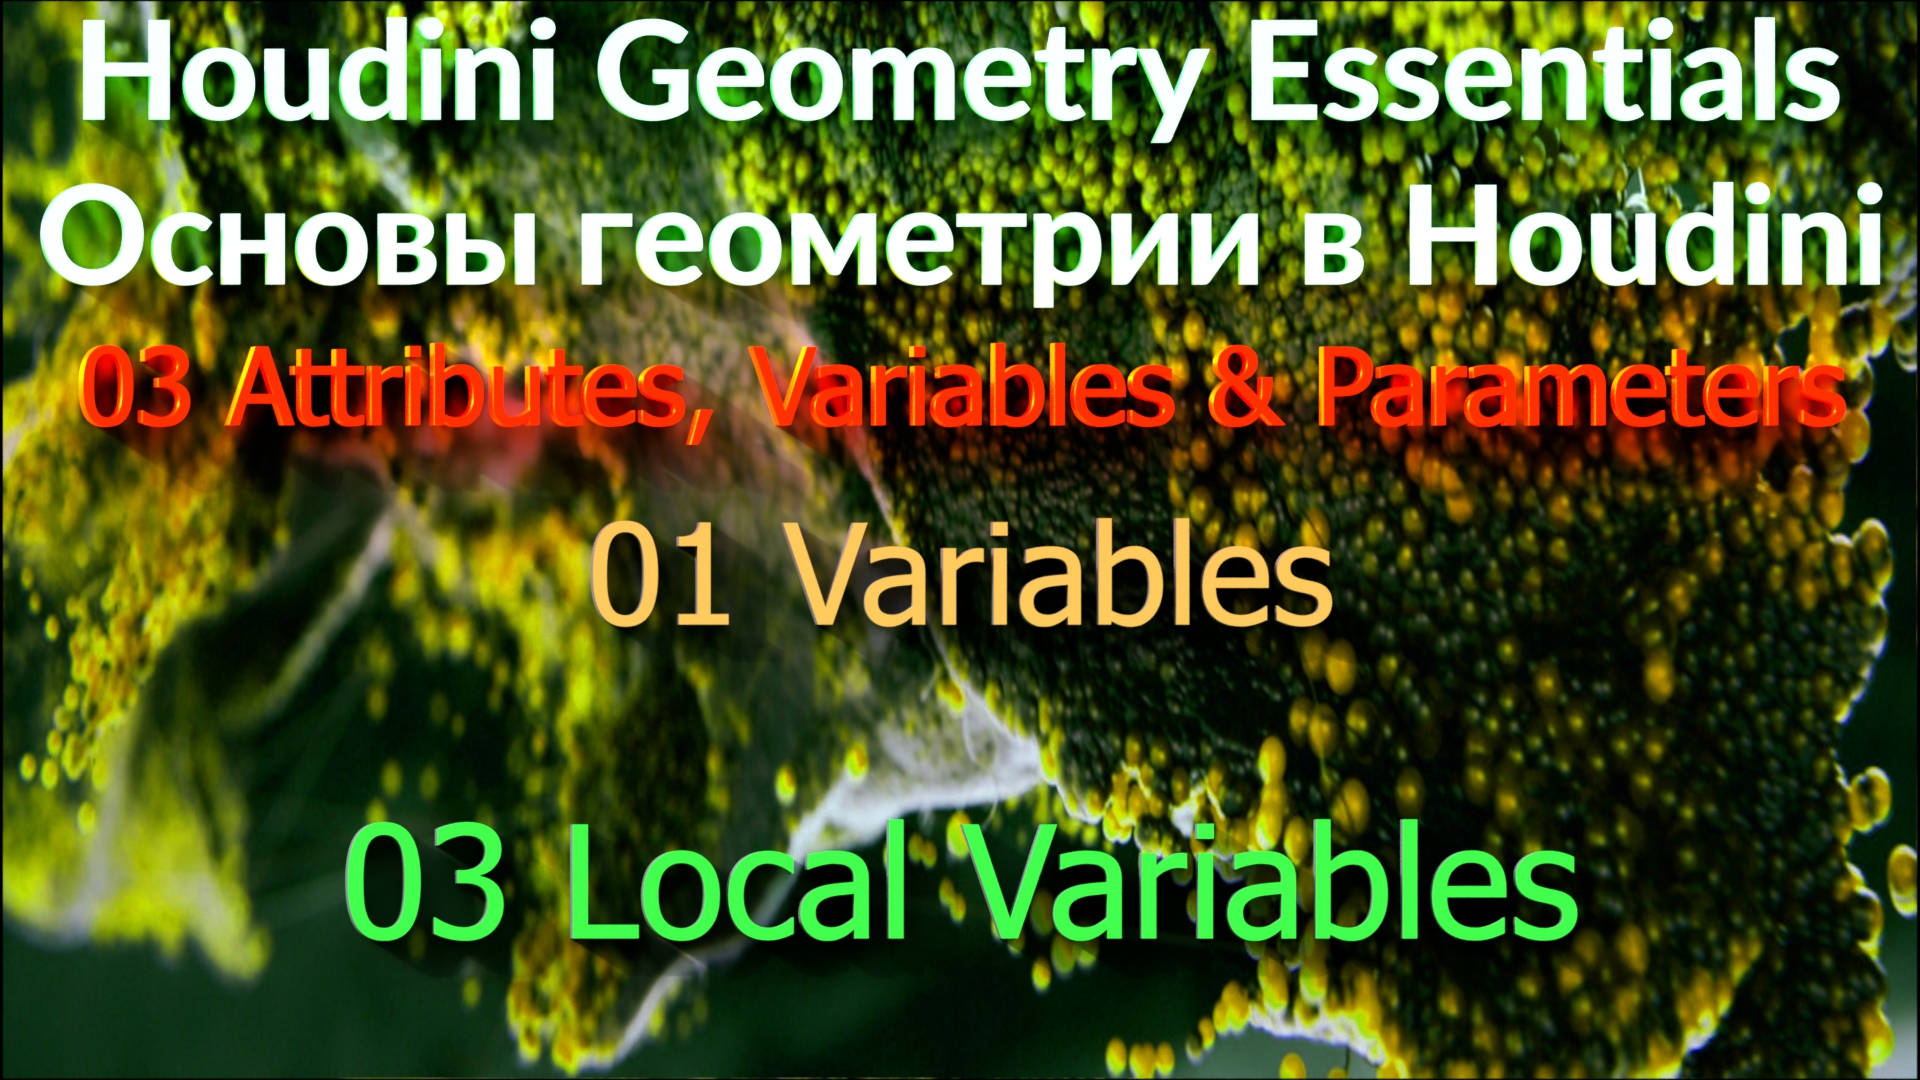 03_01_03 Local Variables